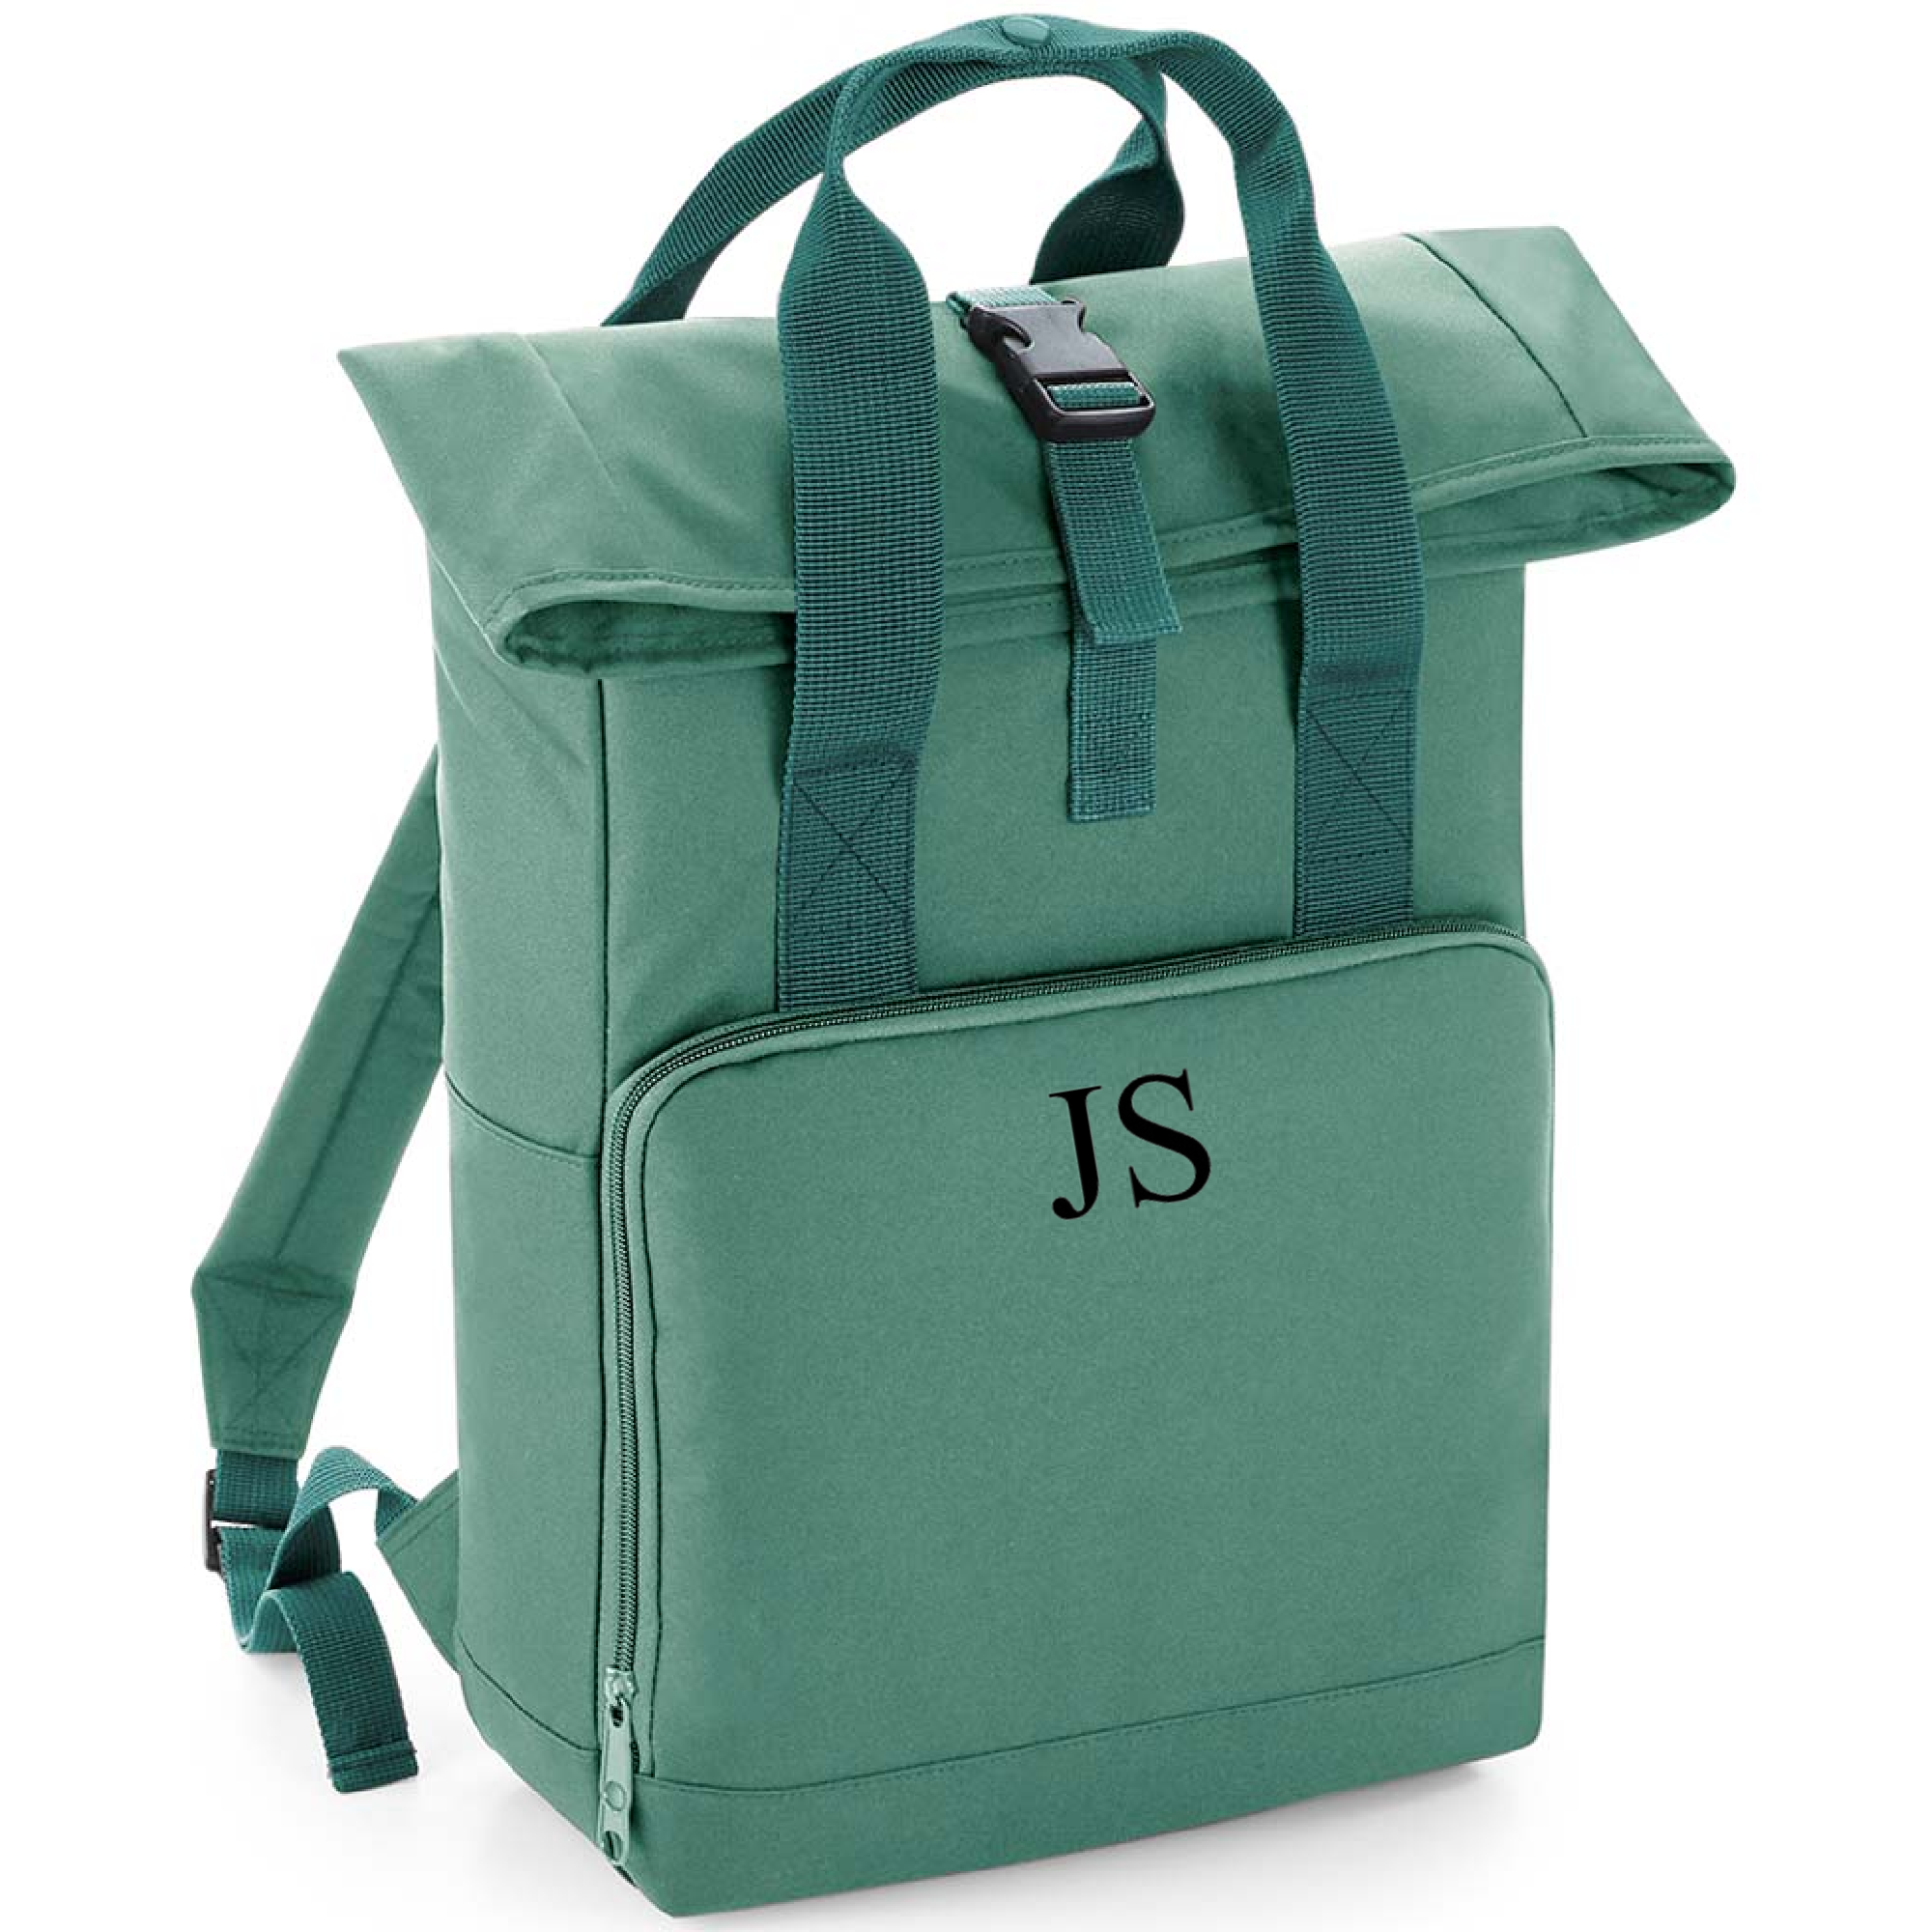 Personalised Roll Top Backpack - Large Twin Handle Rucksack